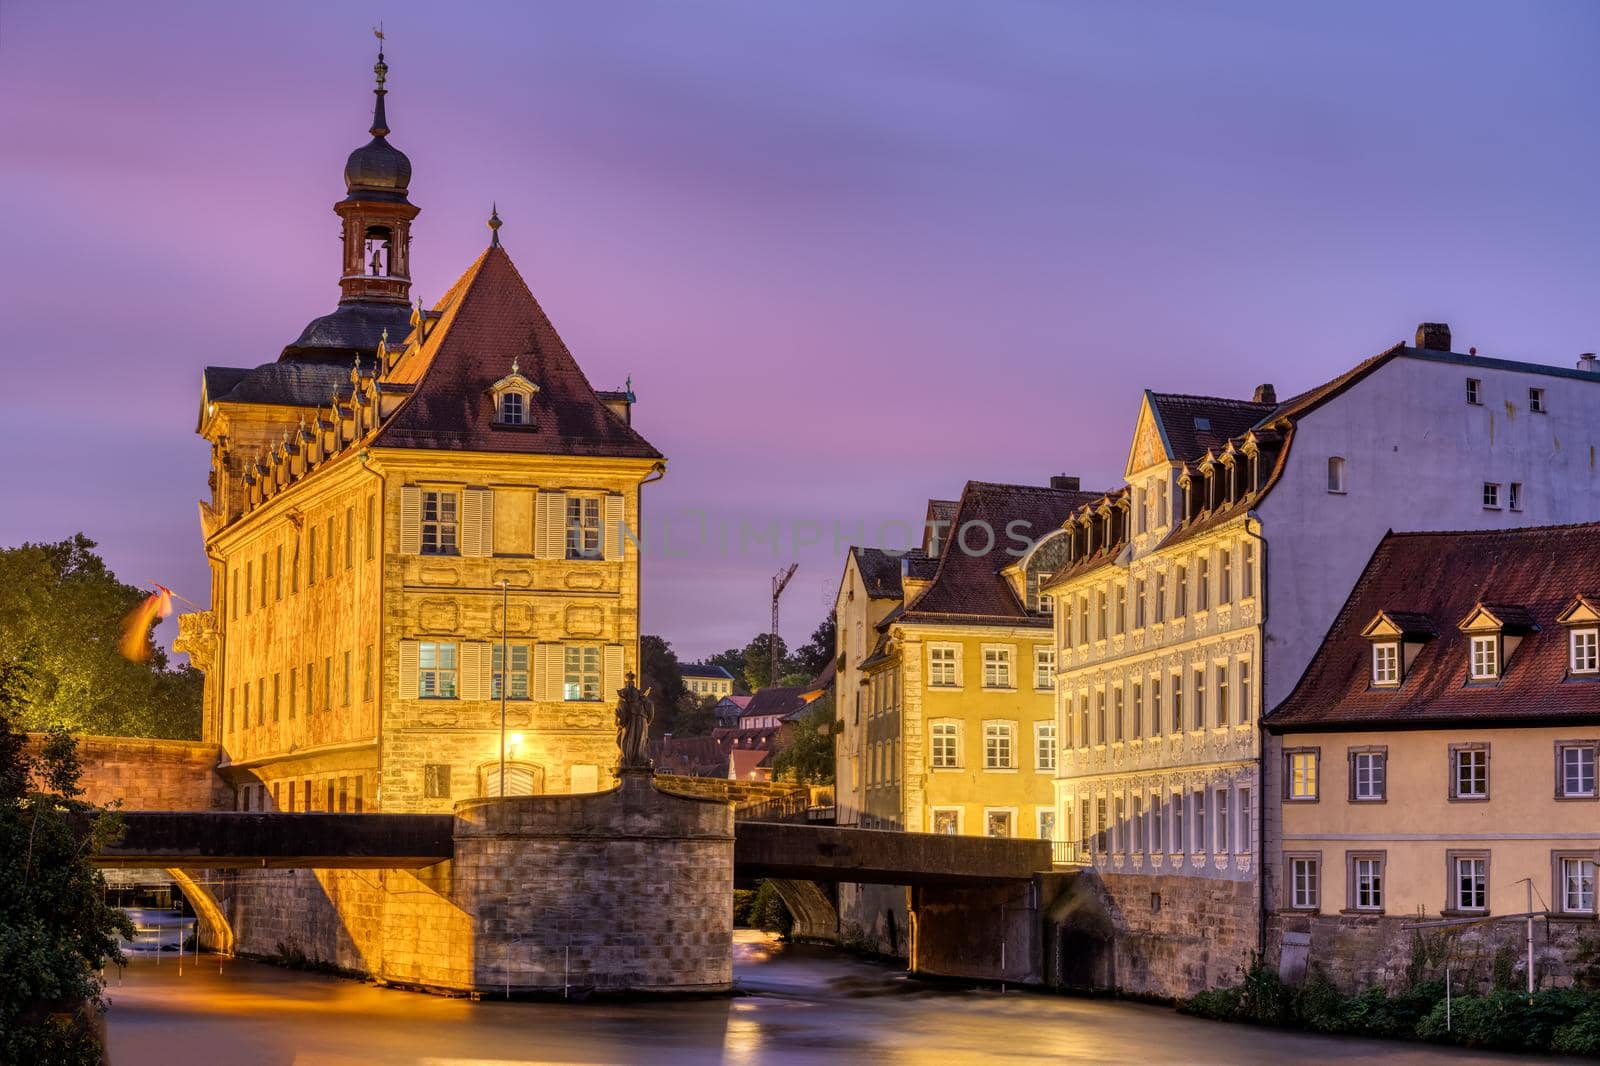 The Alte Rathaus and the river Regnitz in Bamberg, Germany, at dawn